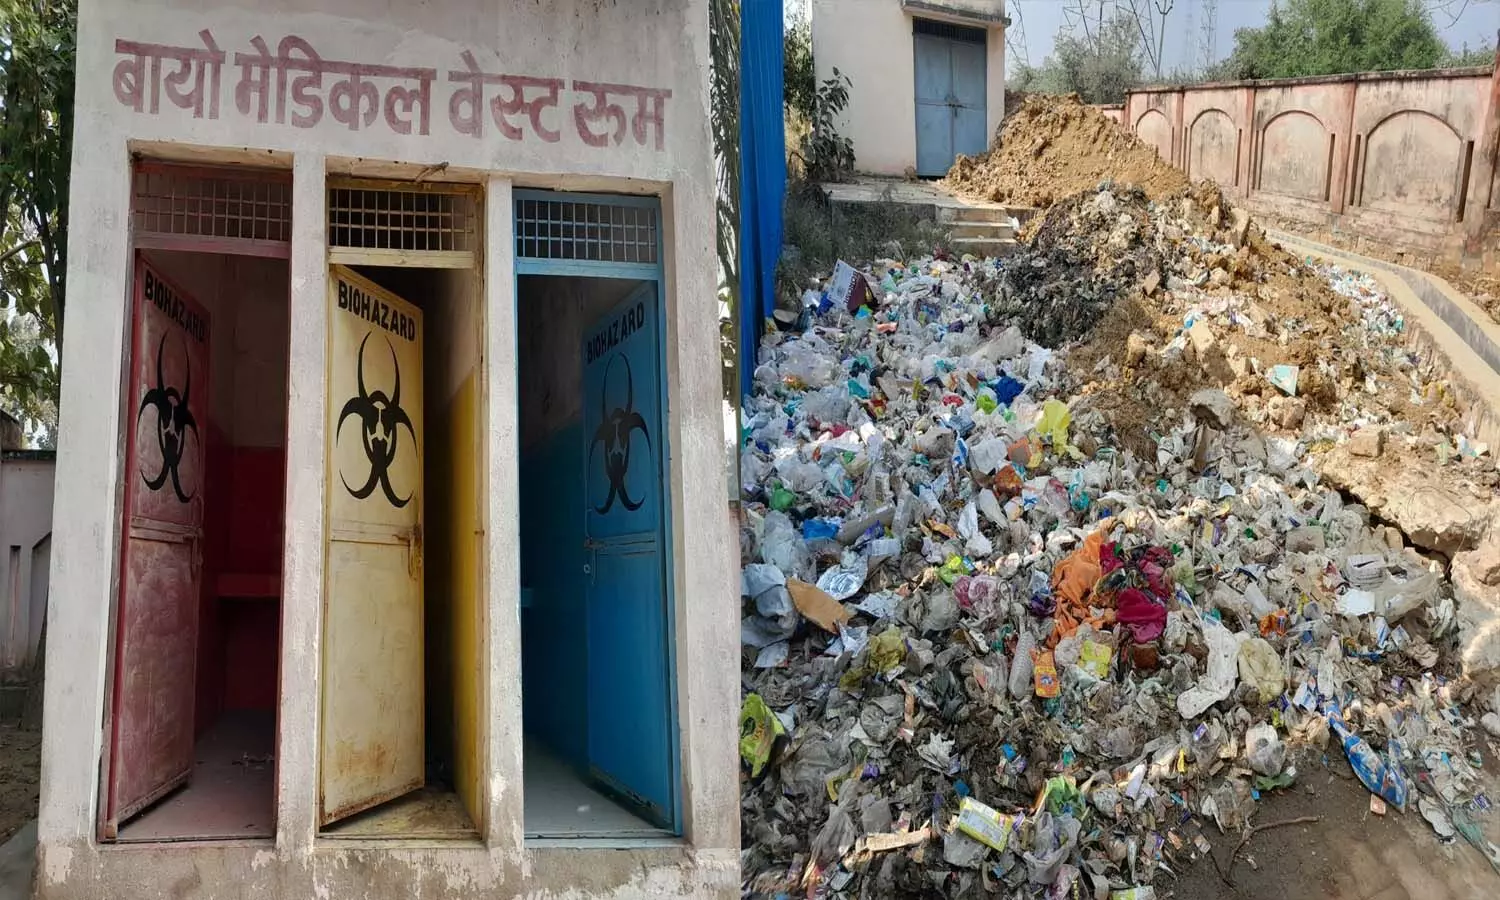 Photos of unsafe disposal of medical waste in Sonbhadra go viral, pollution board issues notice